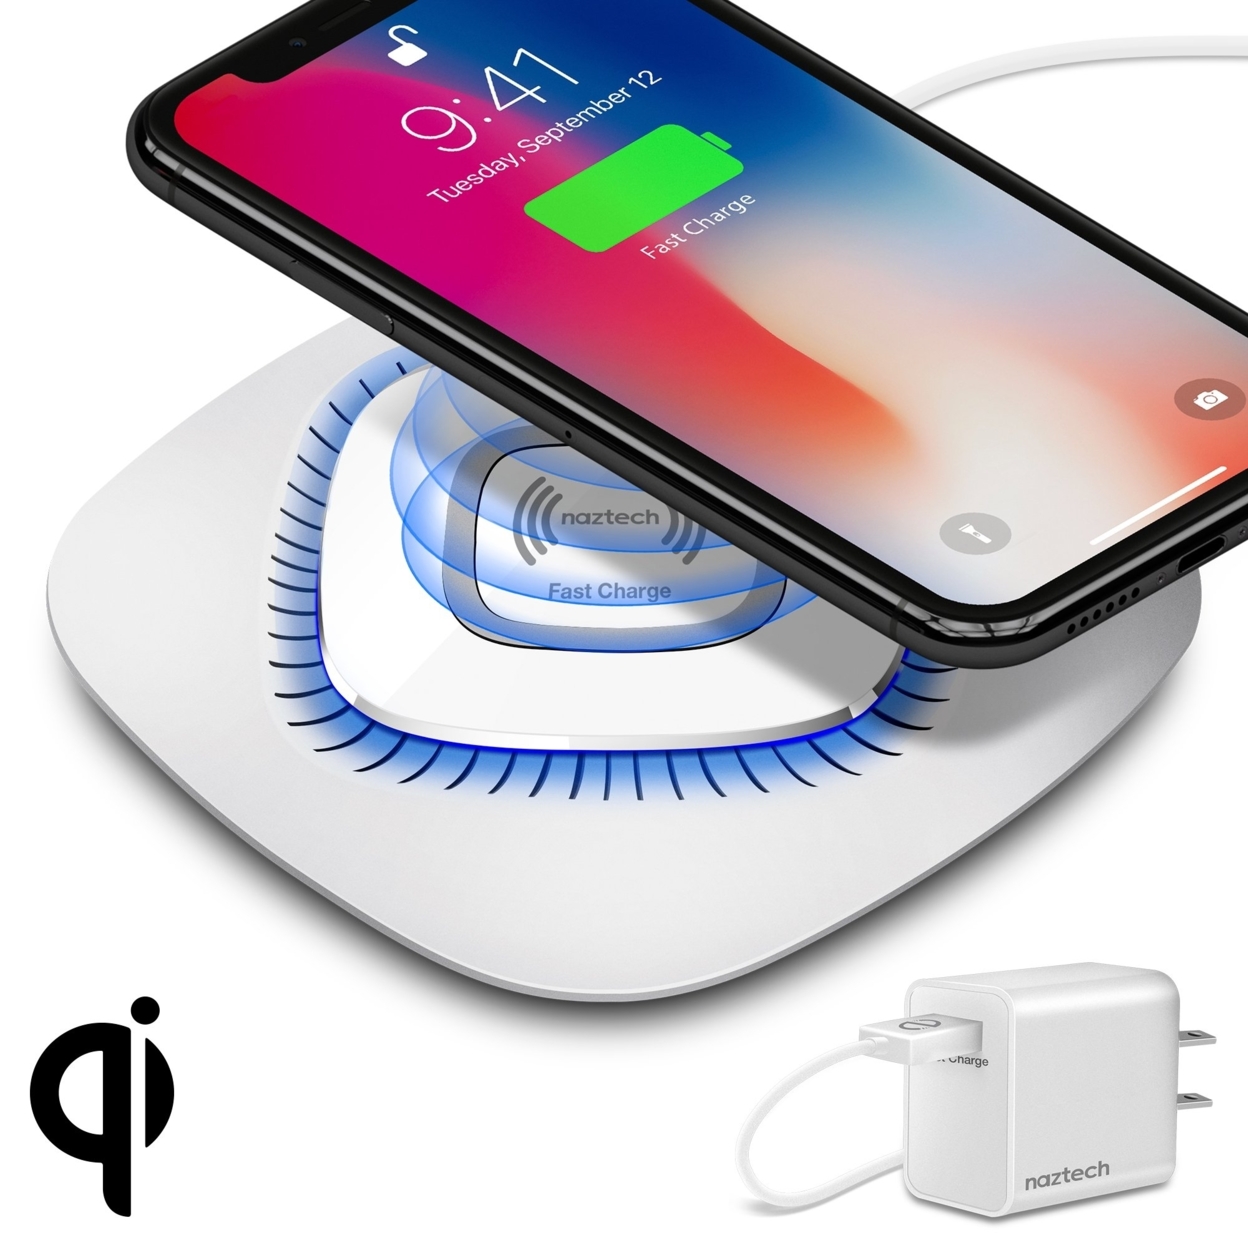 Naztech Power Pad Qi Wireless Fast Charger (POWER-PRNT) - White